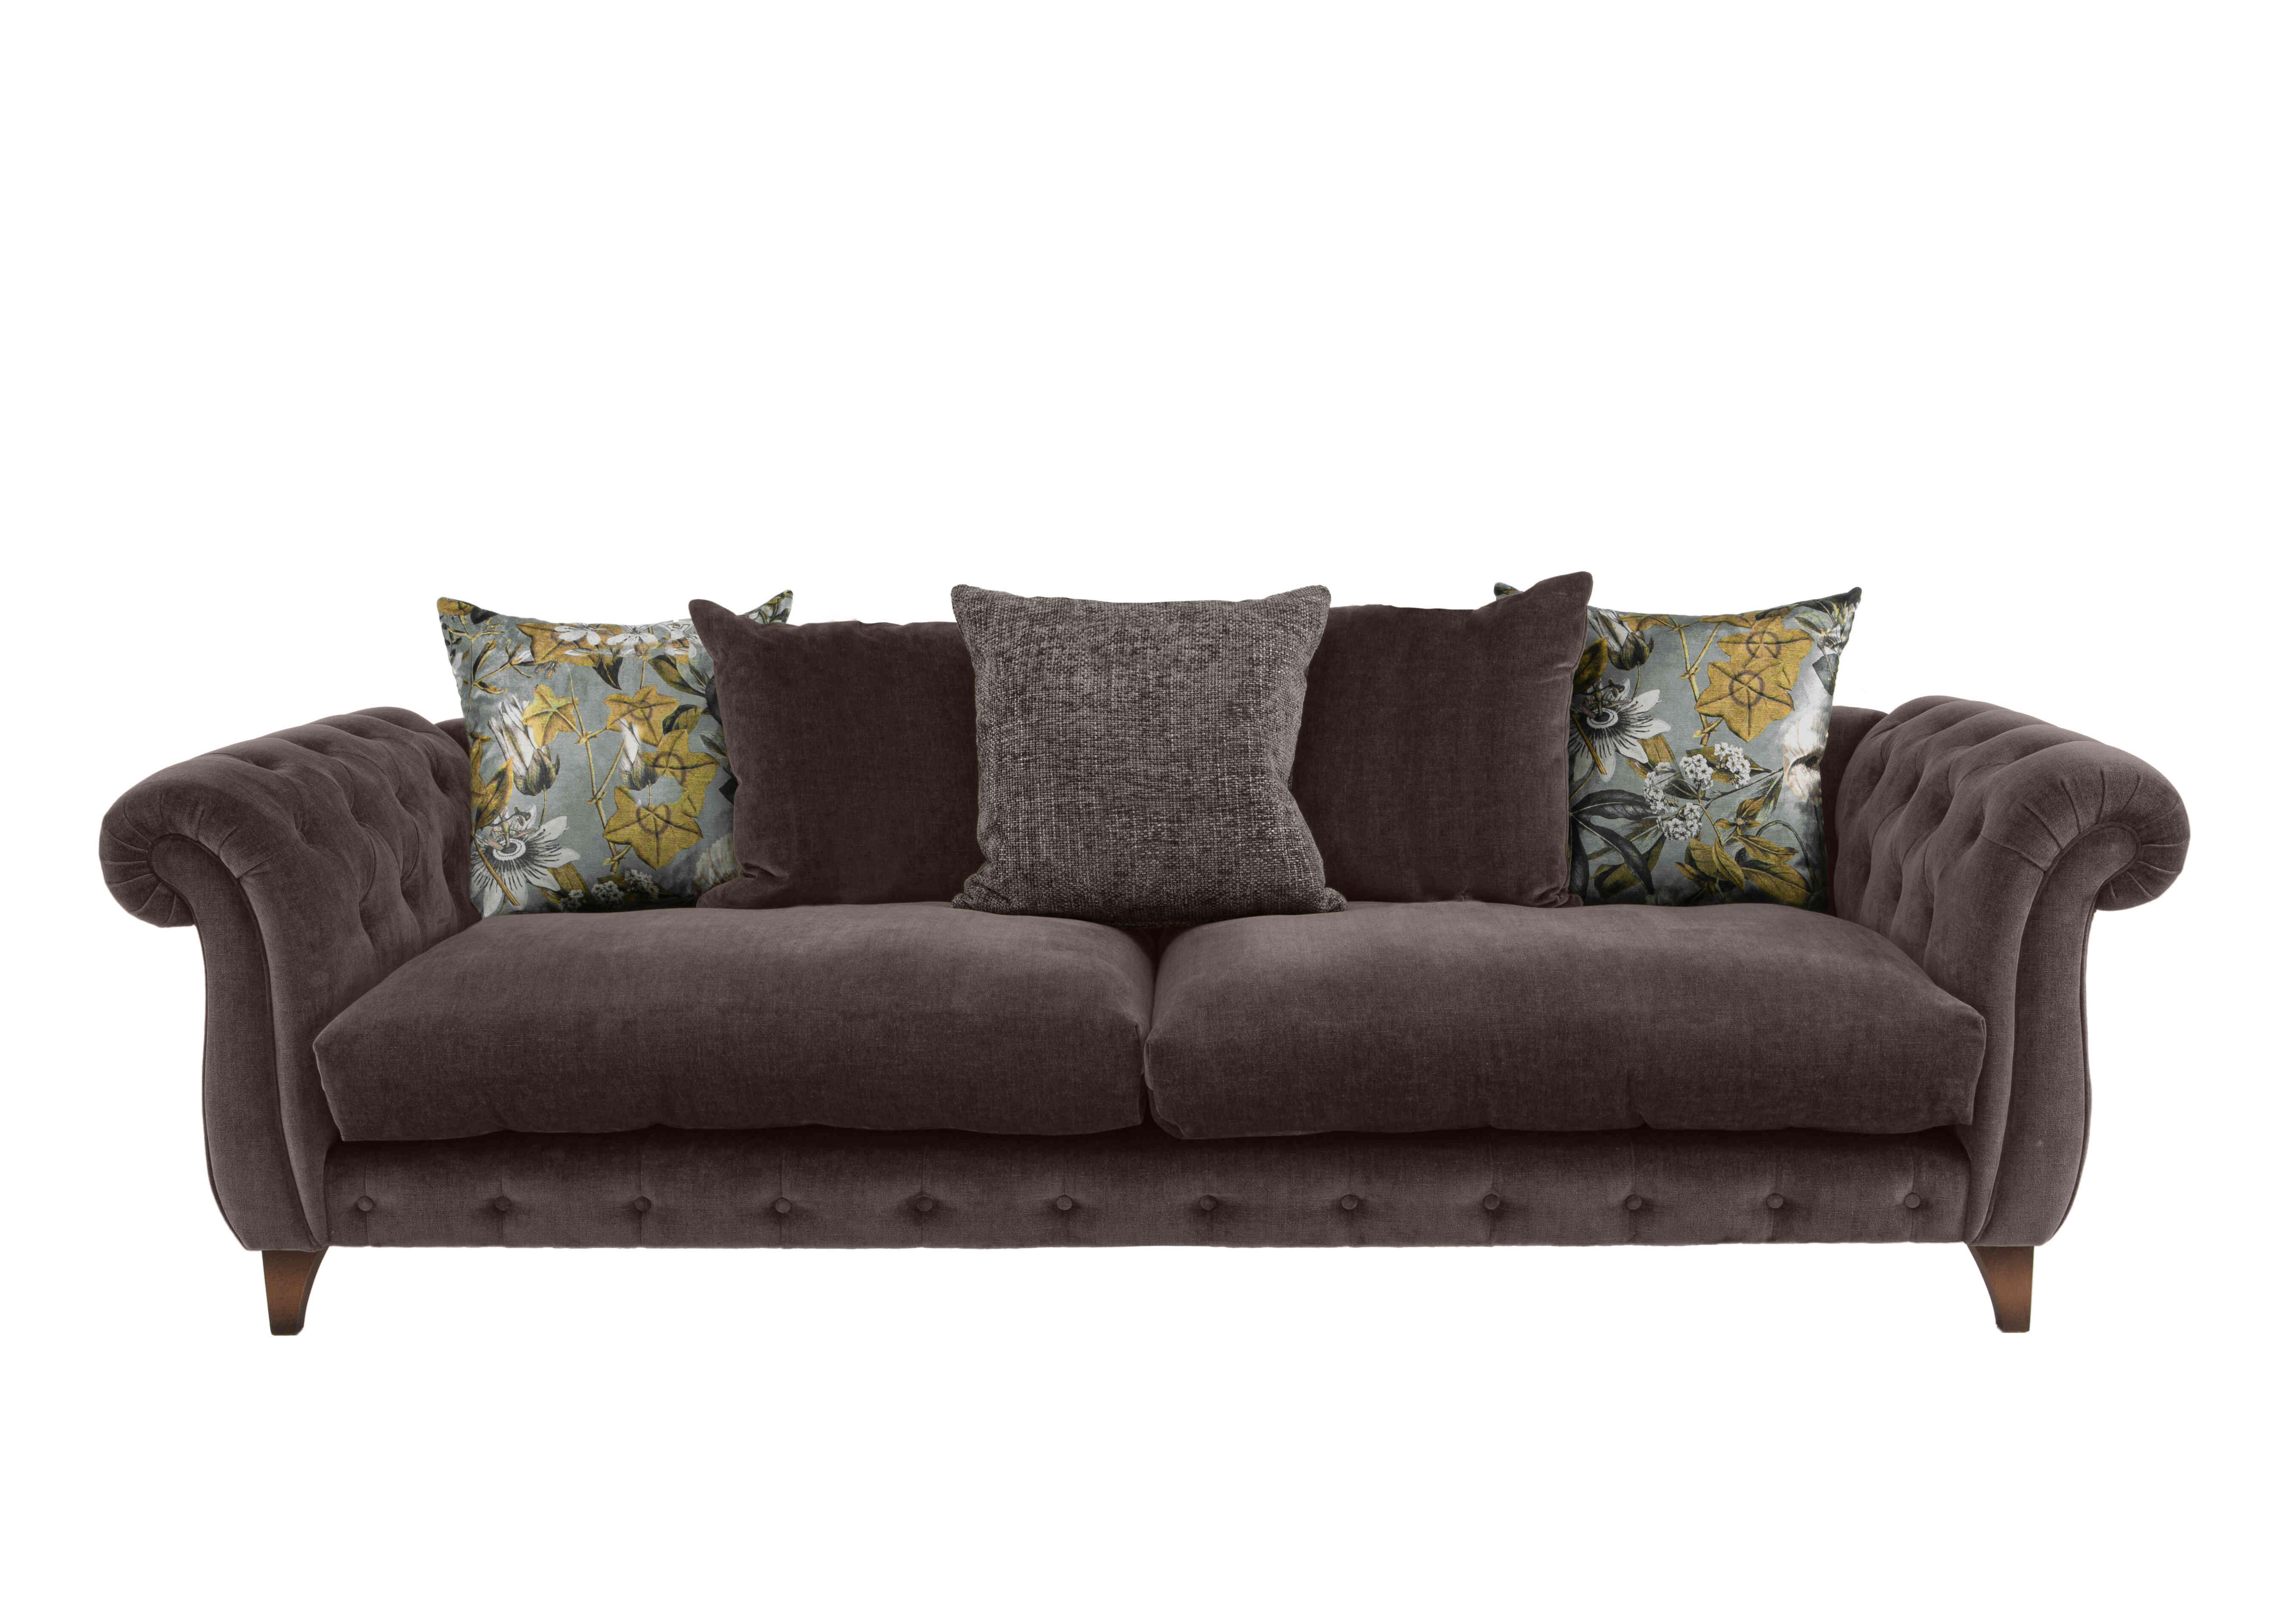 Boutique Palace Fabric 4 Seater Scatter Back Sofa in Oasis Mocha on Furniture Village